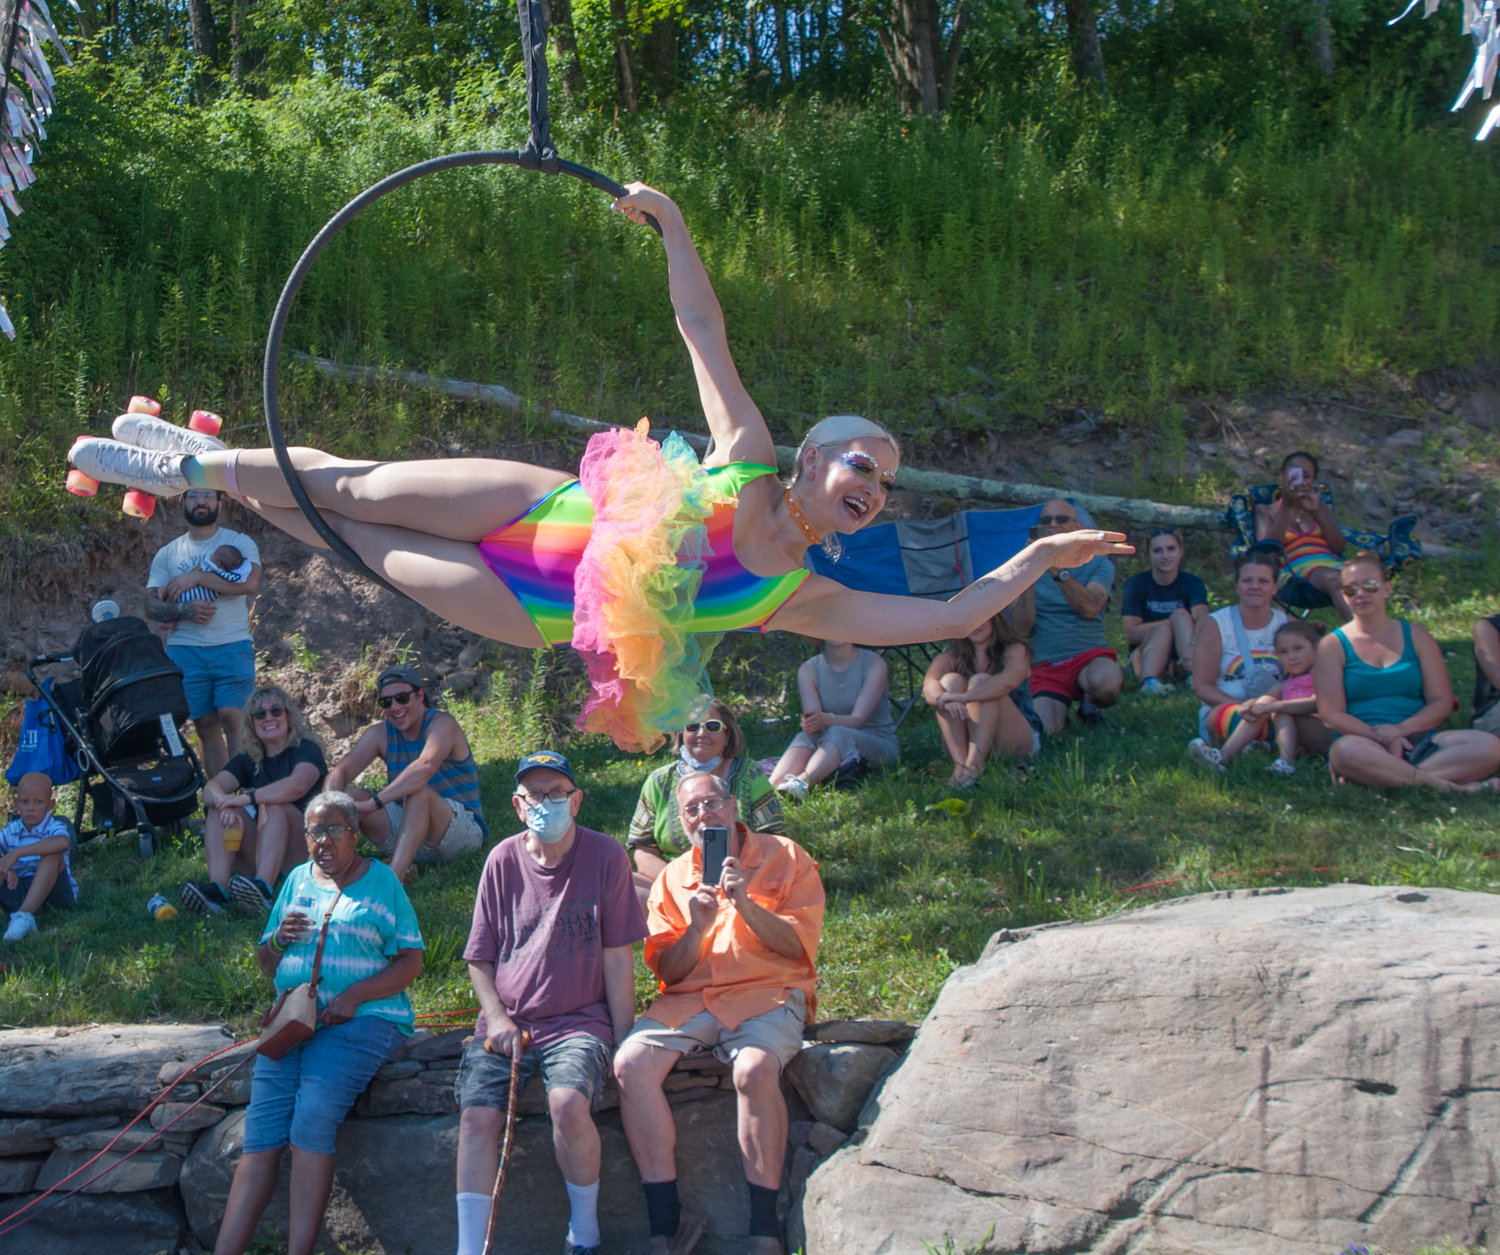 Dharma the Wonder Dog stayed cool in her stroller and enjoyed aerialists from the House of Yes during Hurleyville Pride festivities last weekend. Colorful, no?